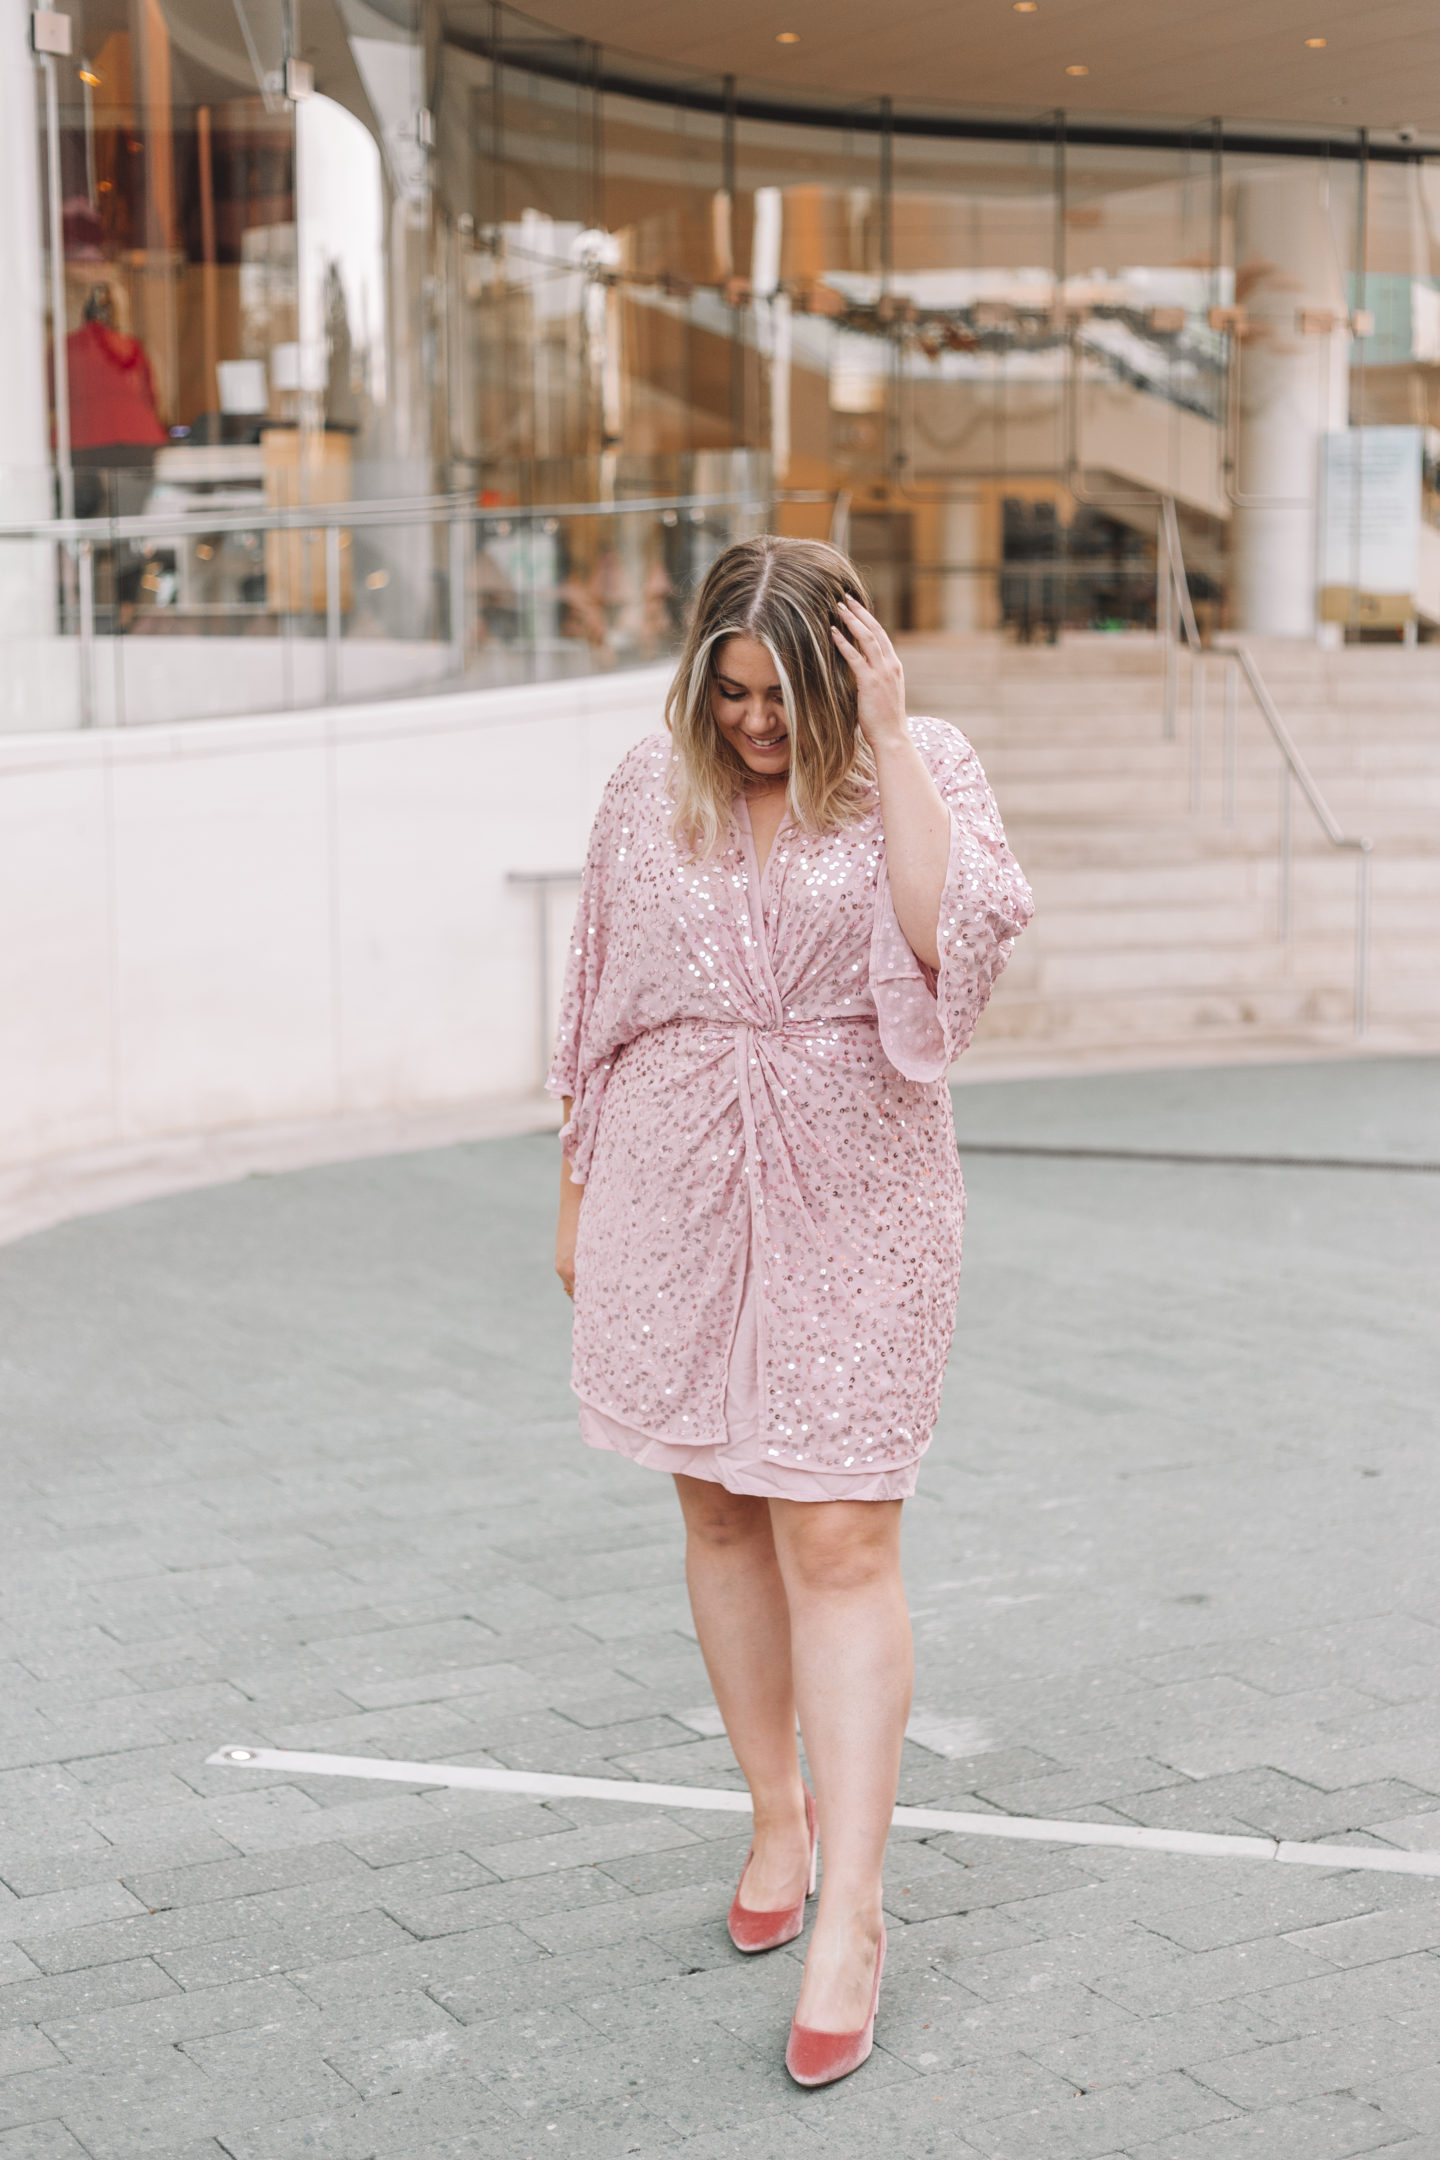 New Years Eve 2019 Dress Roundup, pink sequin dress